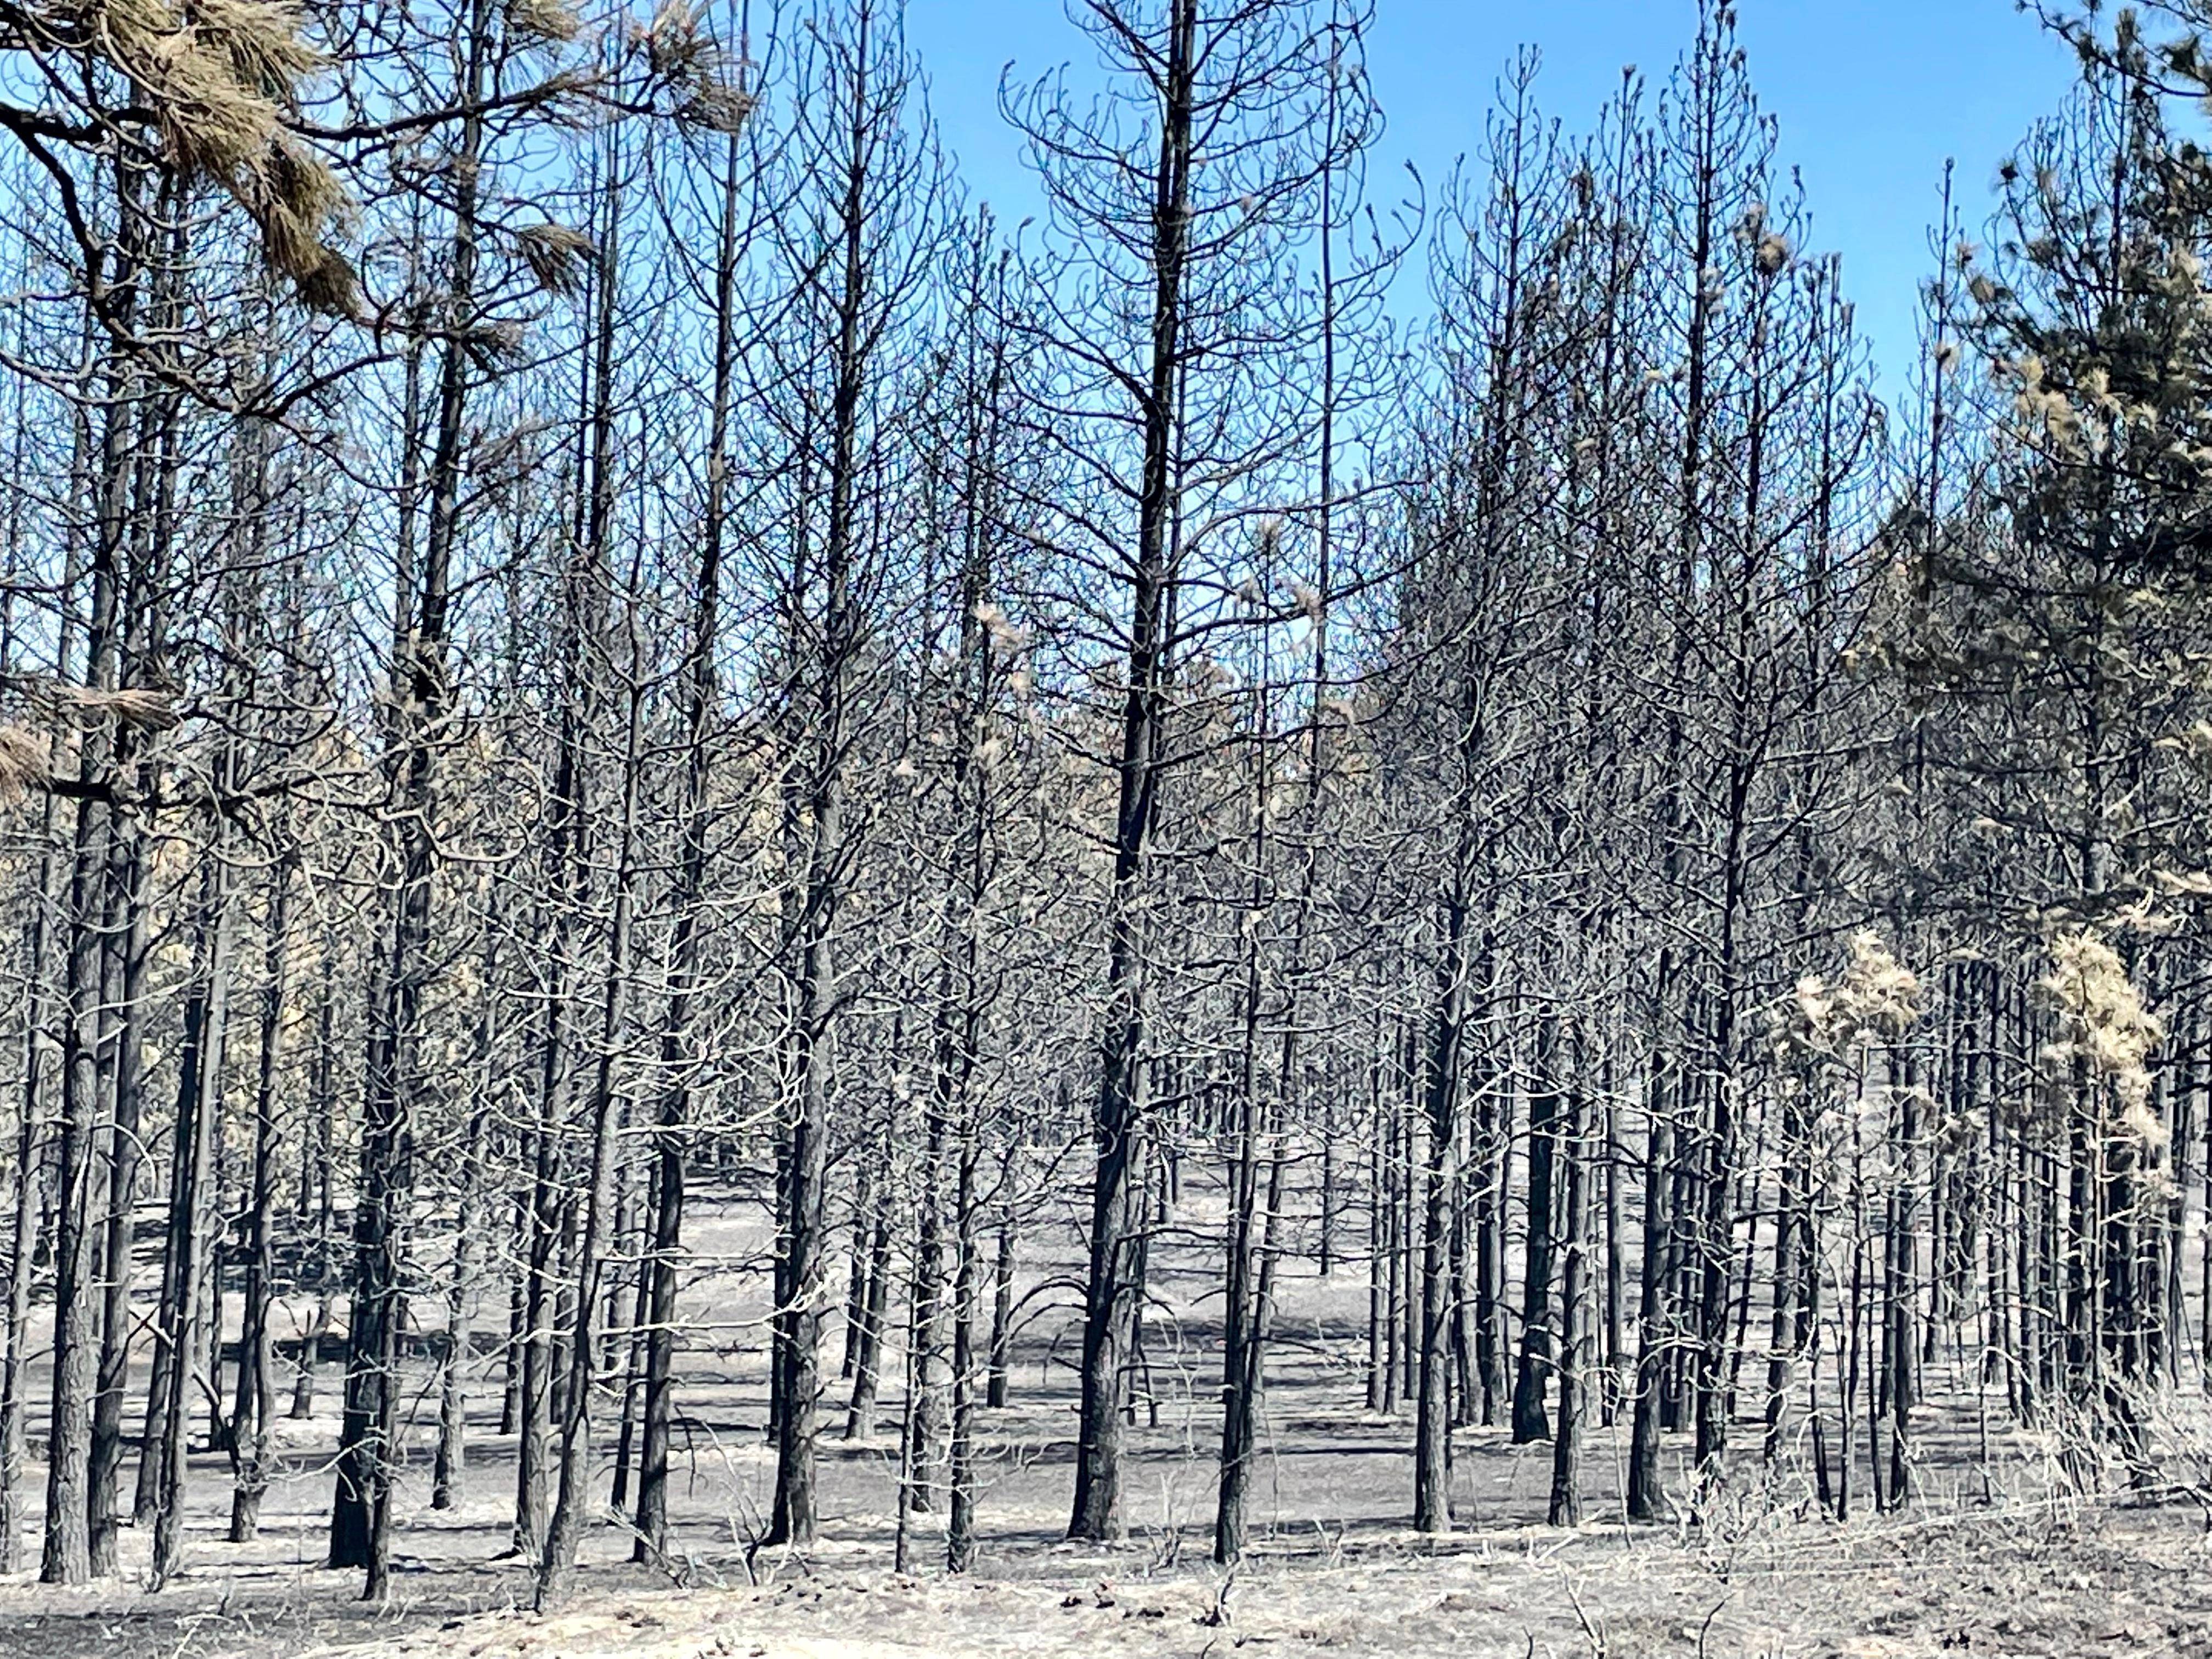 The fire burned at a high intensity in the timber leaving the trees charred.